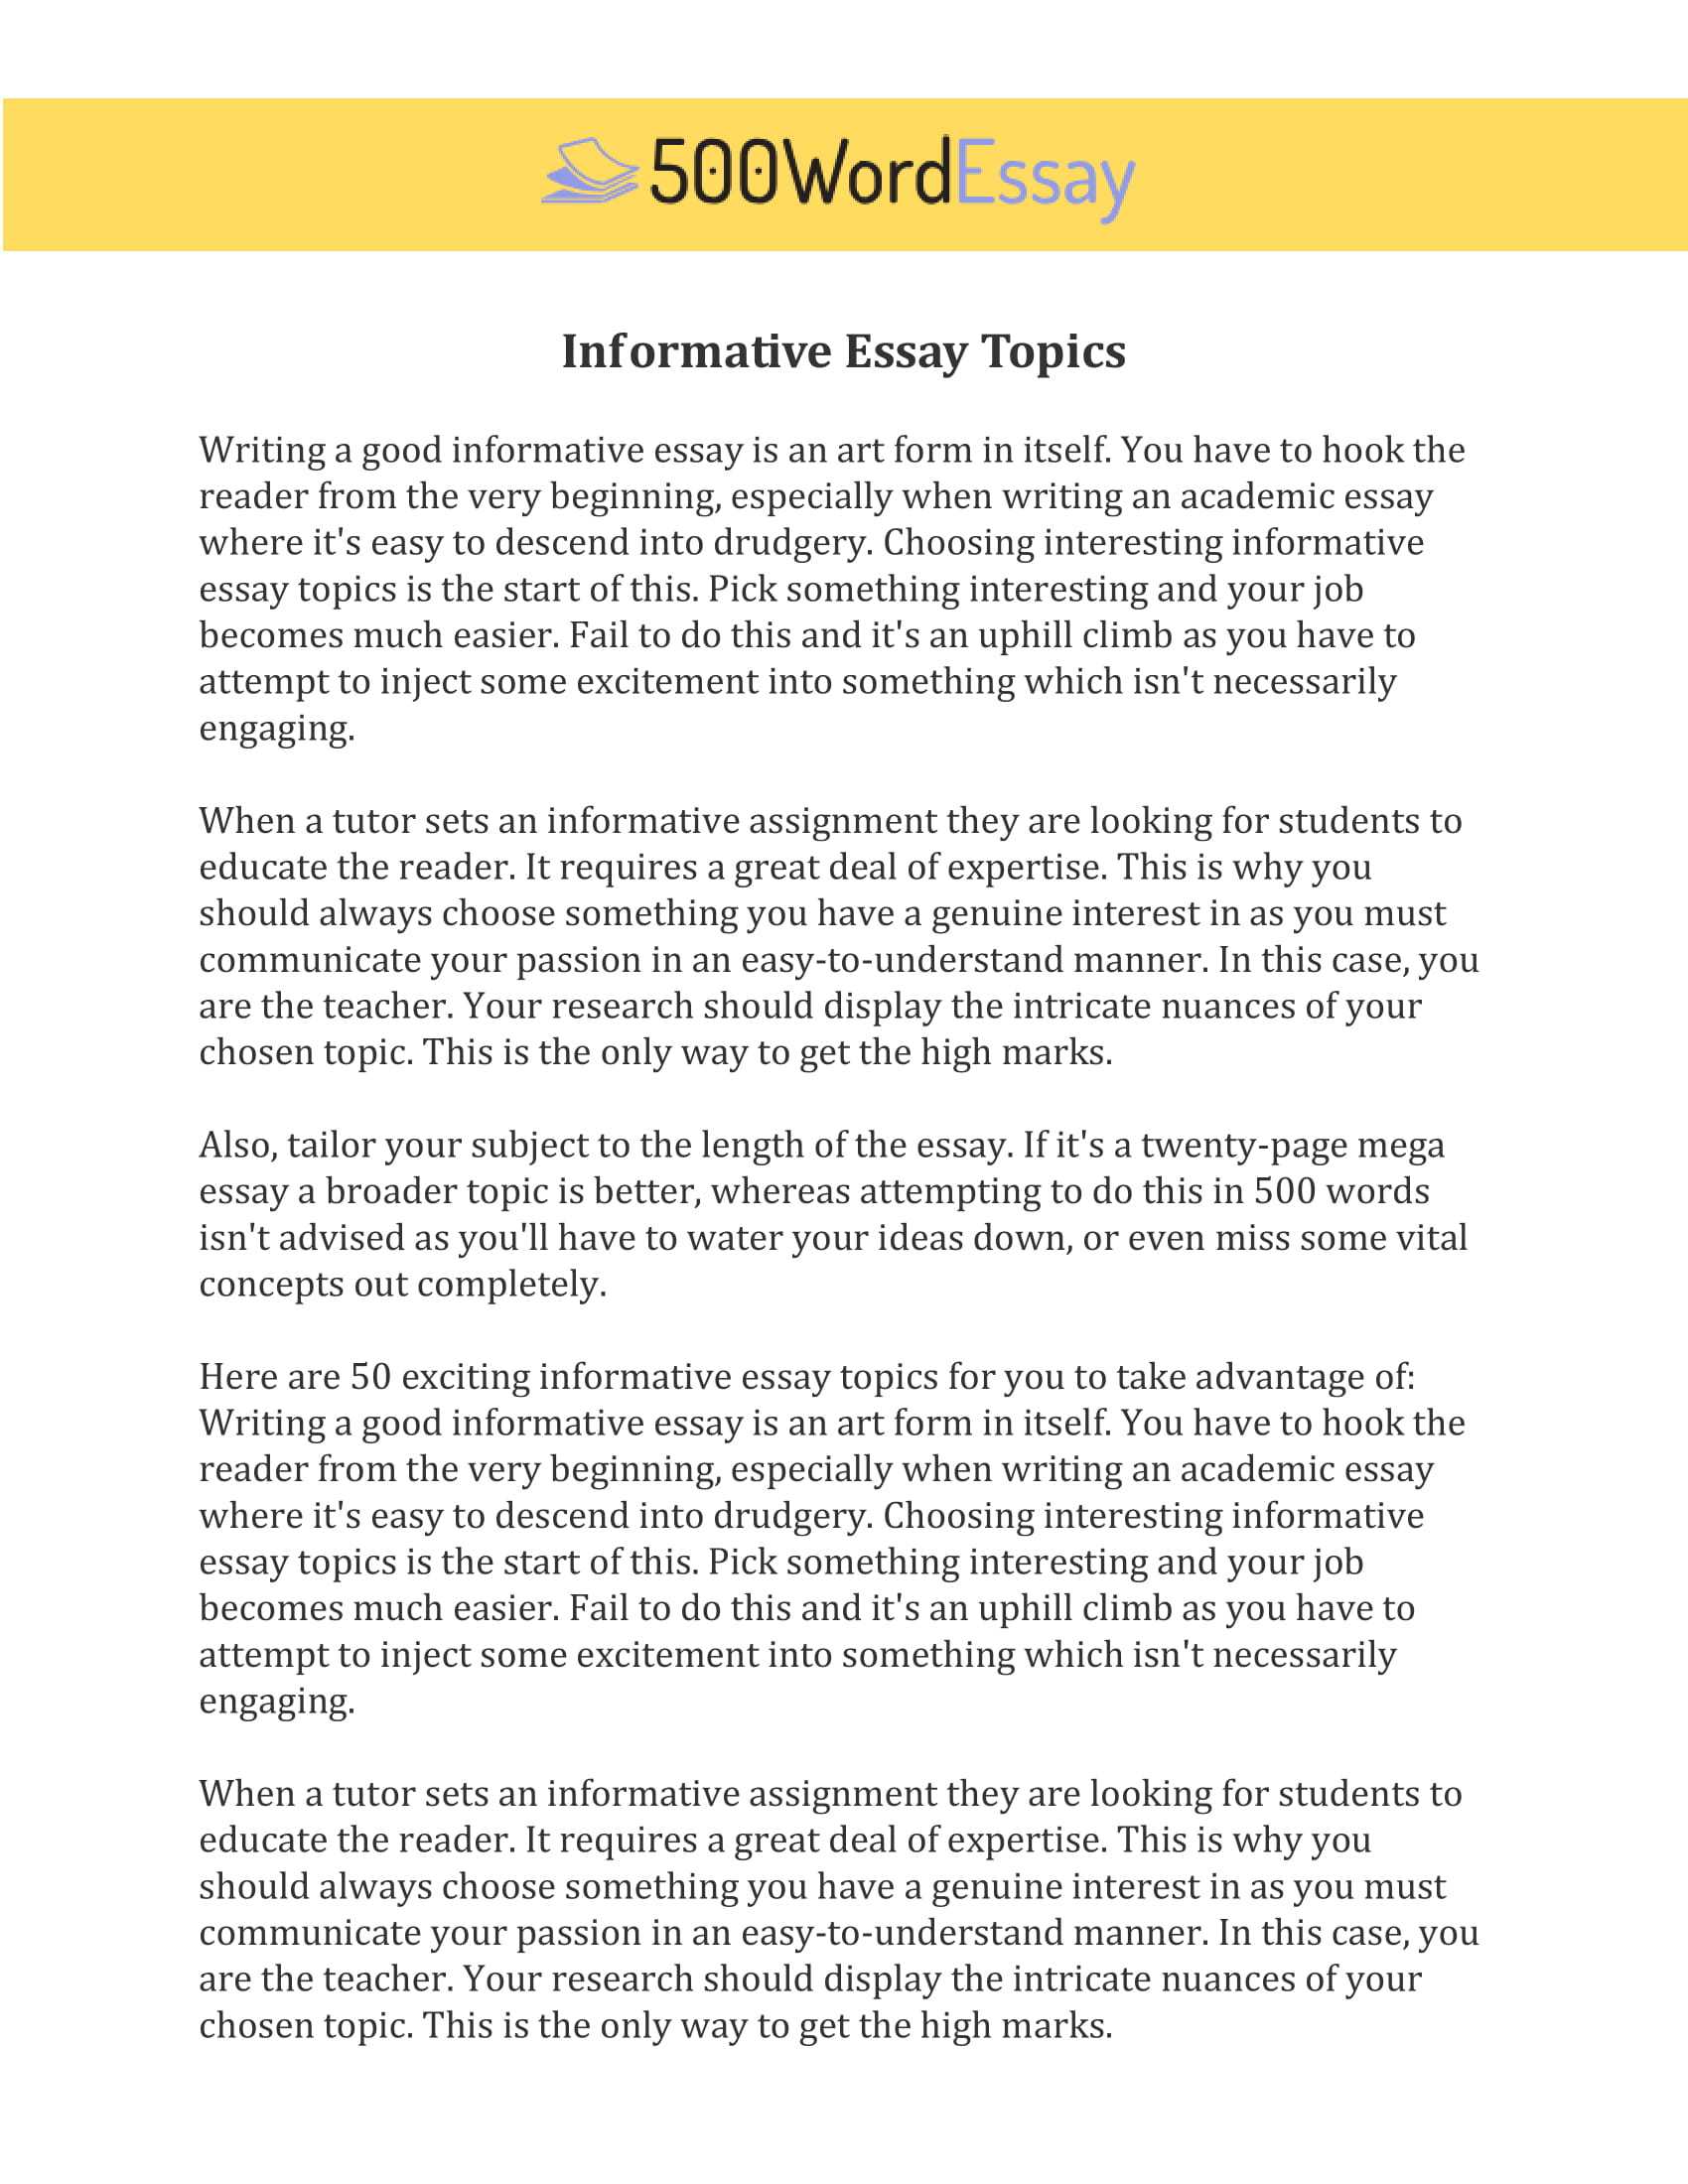 Informative Essay: How To Make A Great Essay | 500Wordessay Throughout 500 Word Essay Template